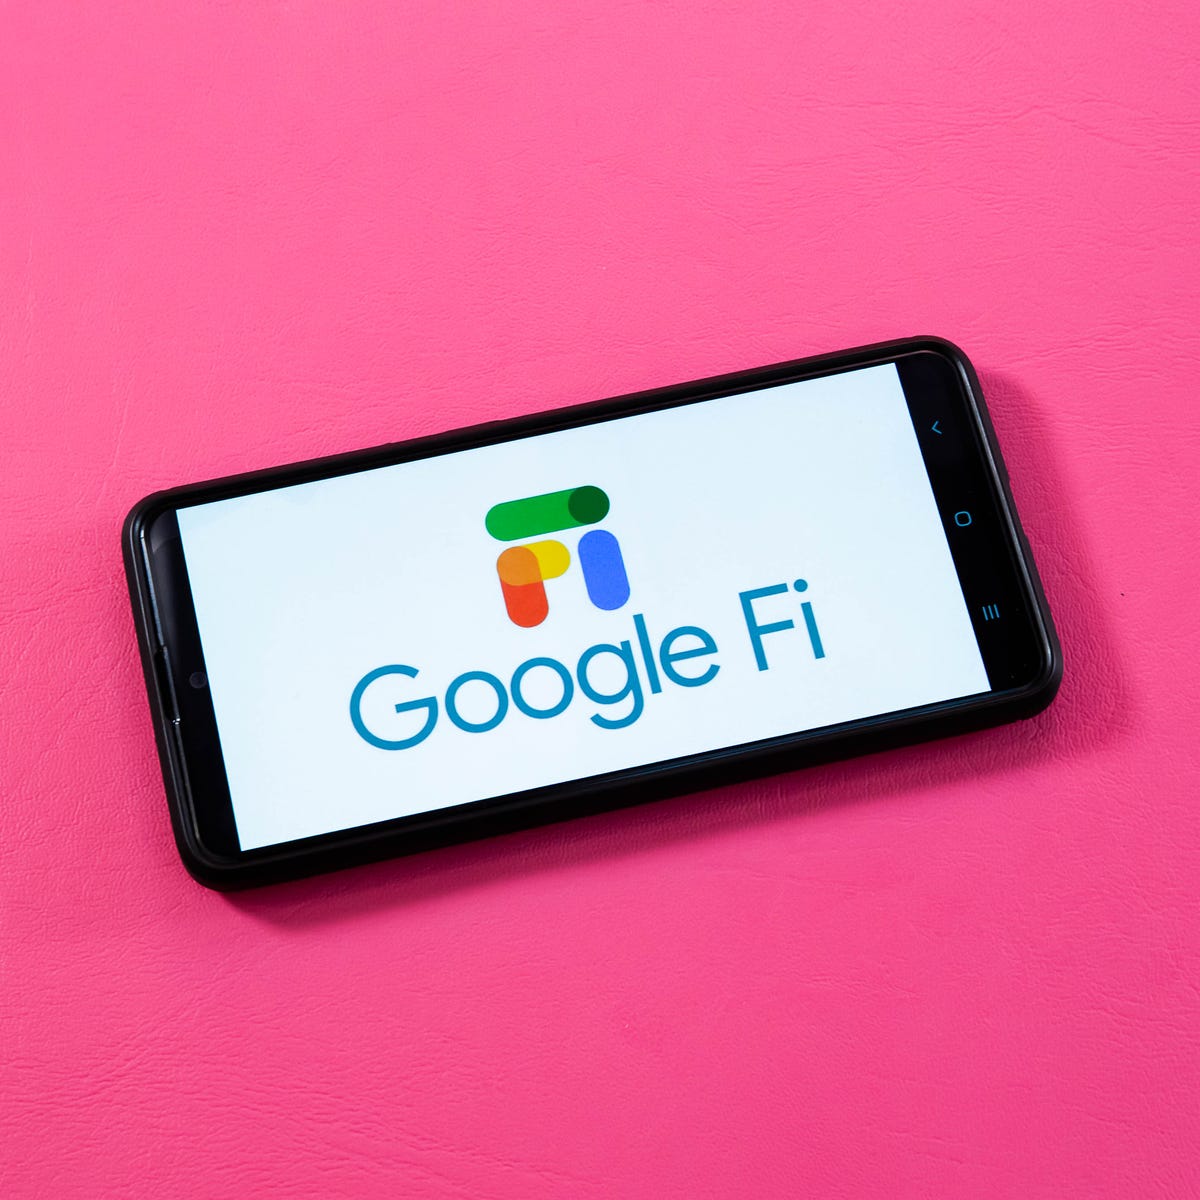 How Google Fi is Revolutionizing the Mobile Industry - Support services and online help resources available for Google Fi users